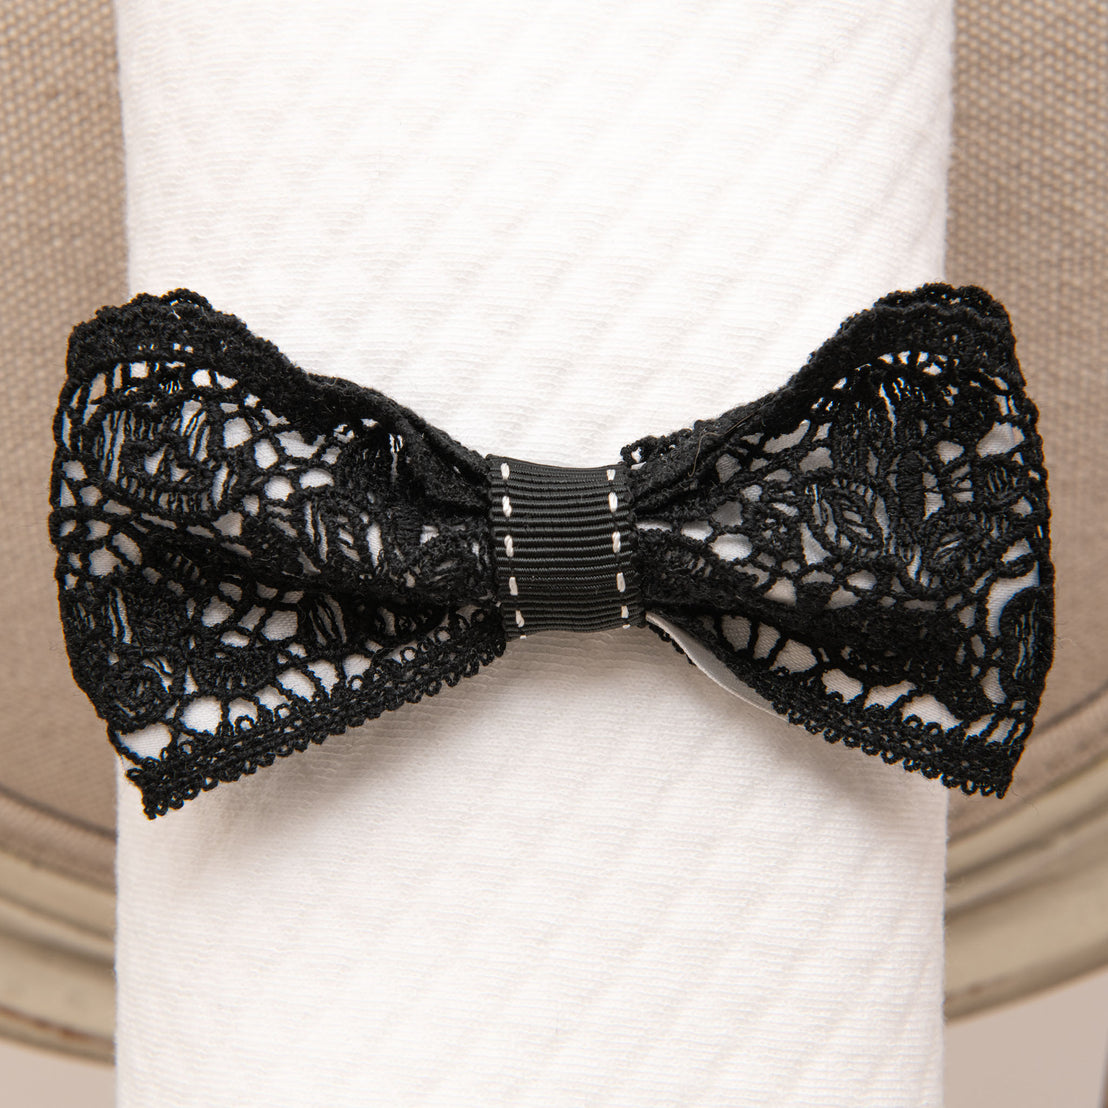 A decorative black floral lace bow tied around a white baby blanket, featuring intricate patterns and a small black clasp at the center. 